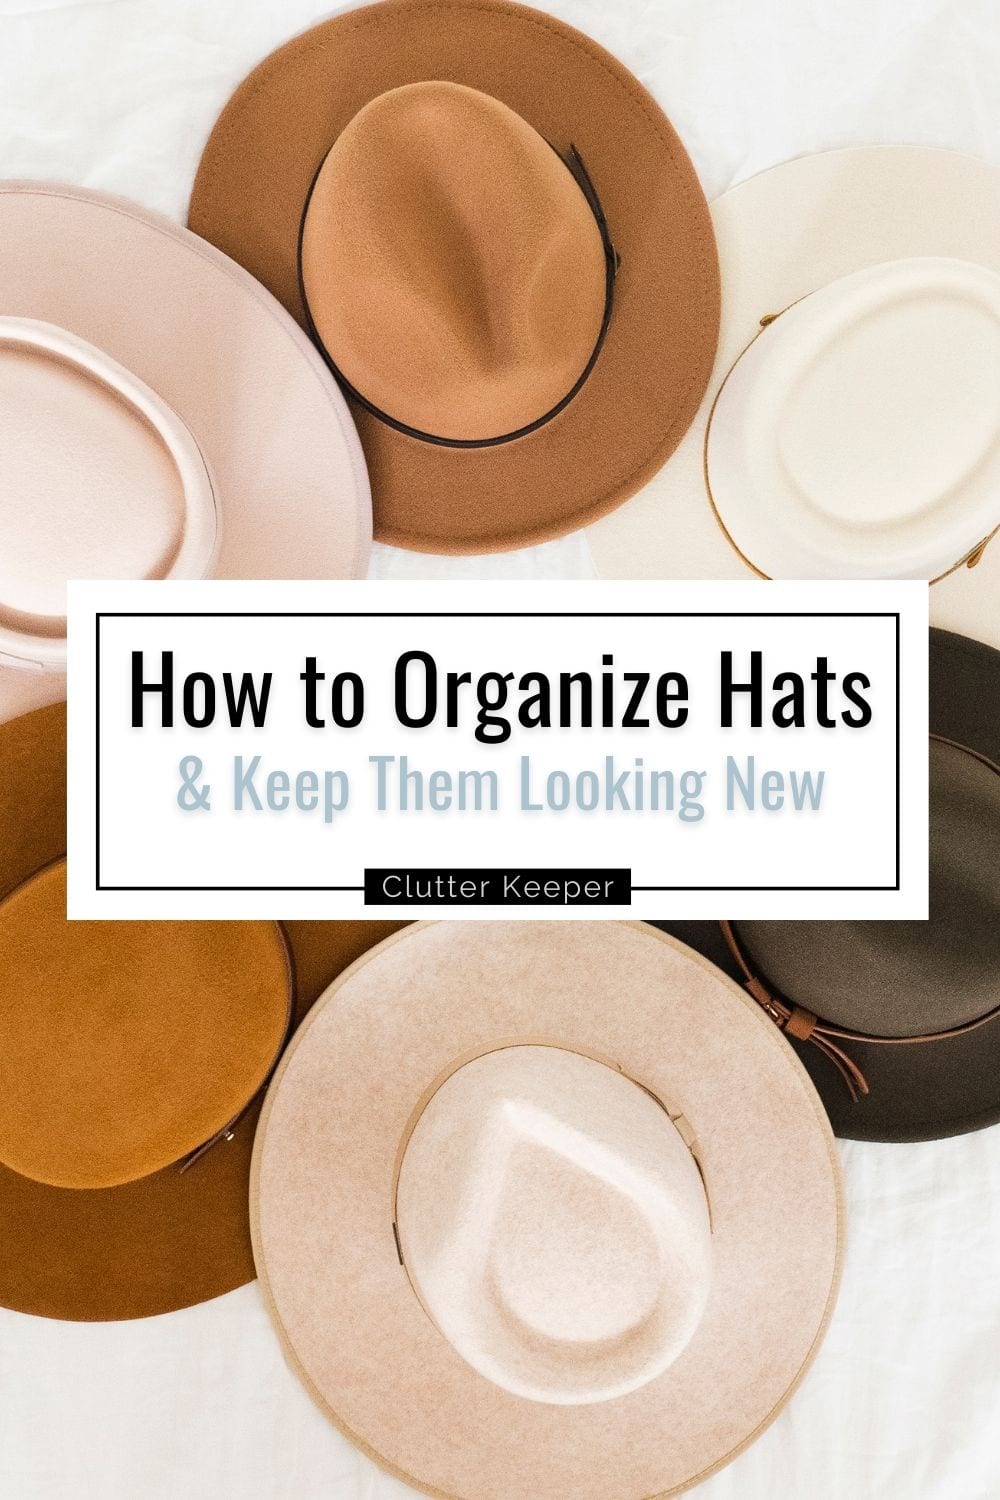 How to organize hats and keep them looking new.